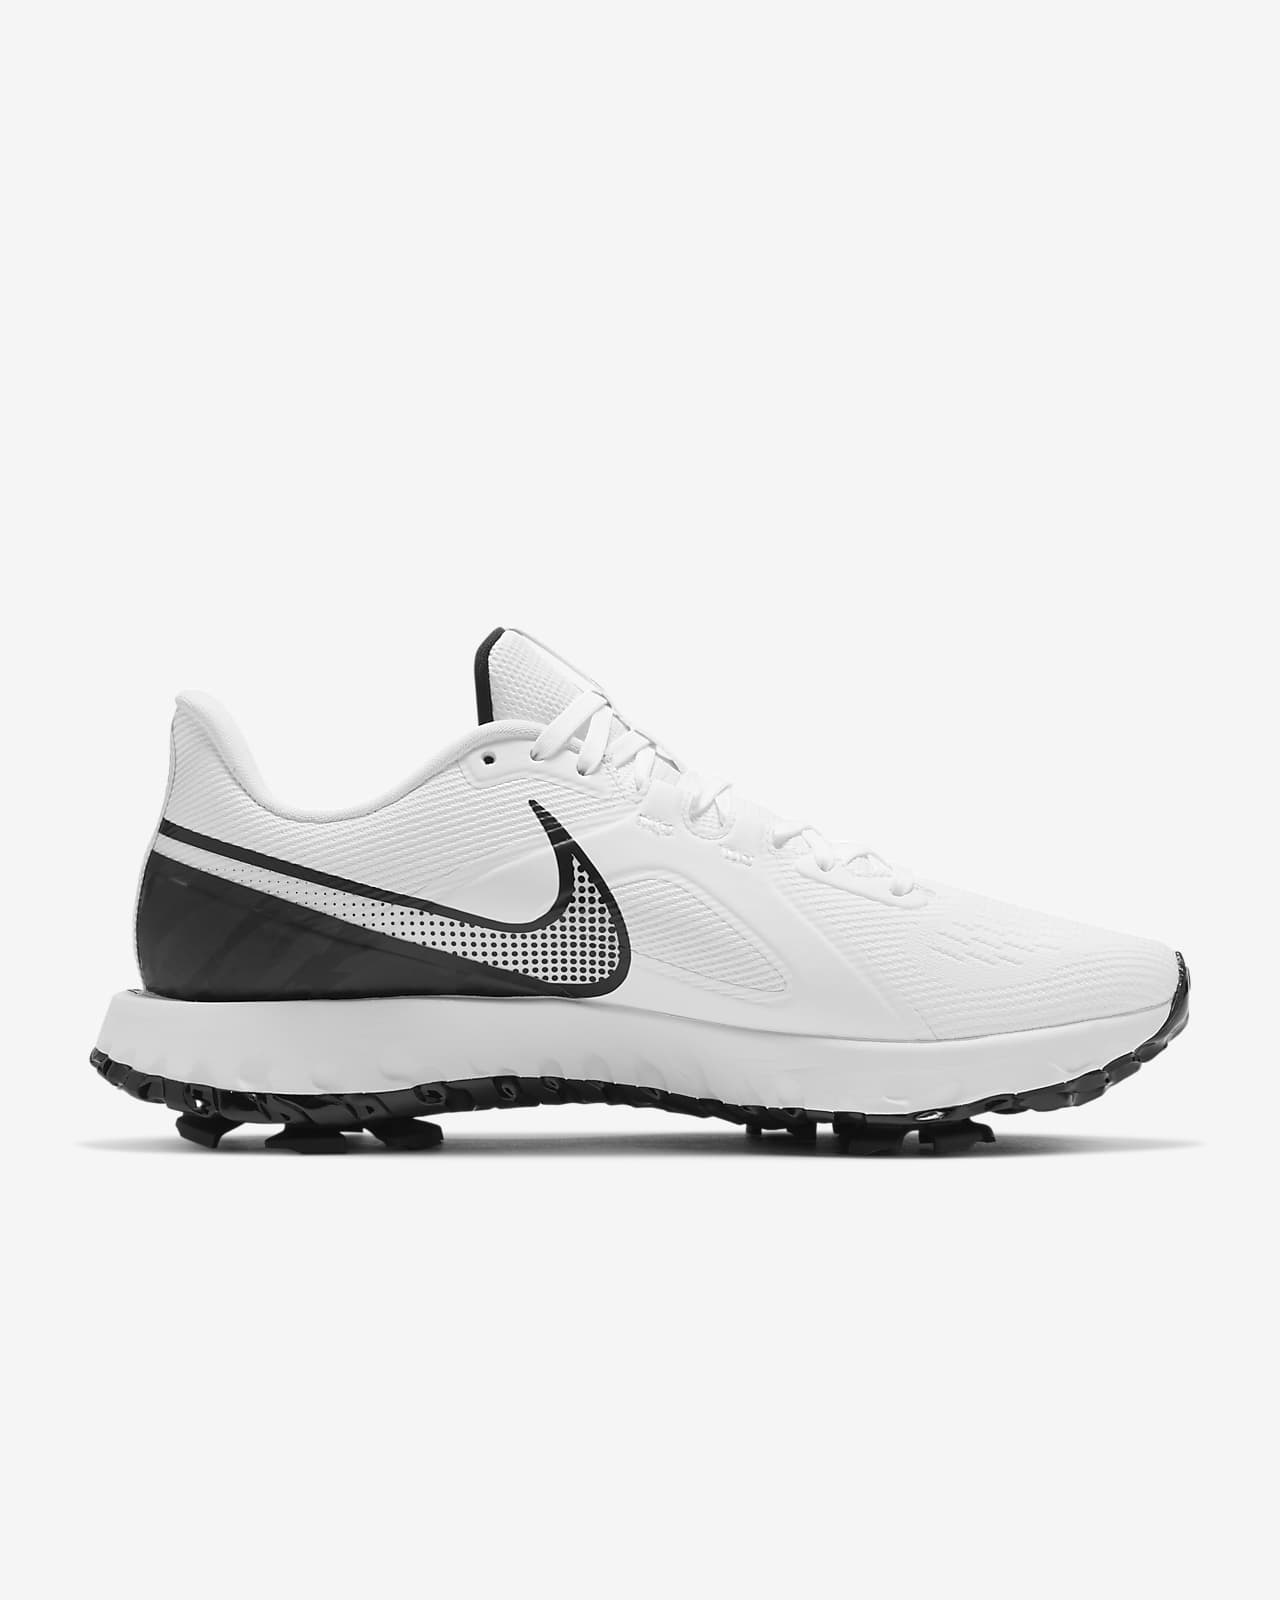 nike extra wide golf shoes